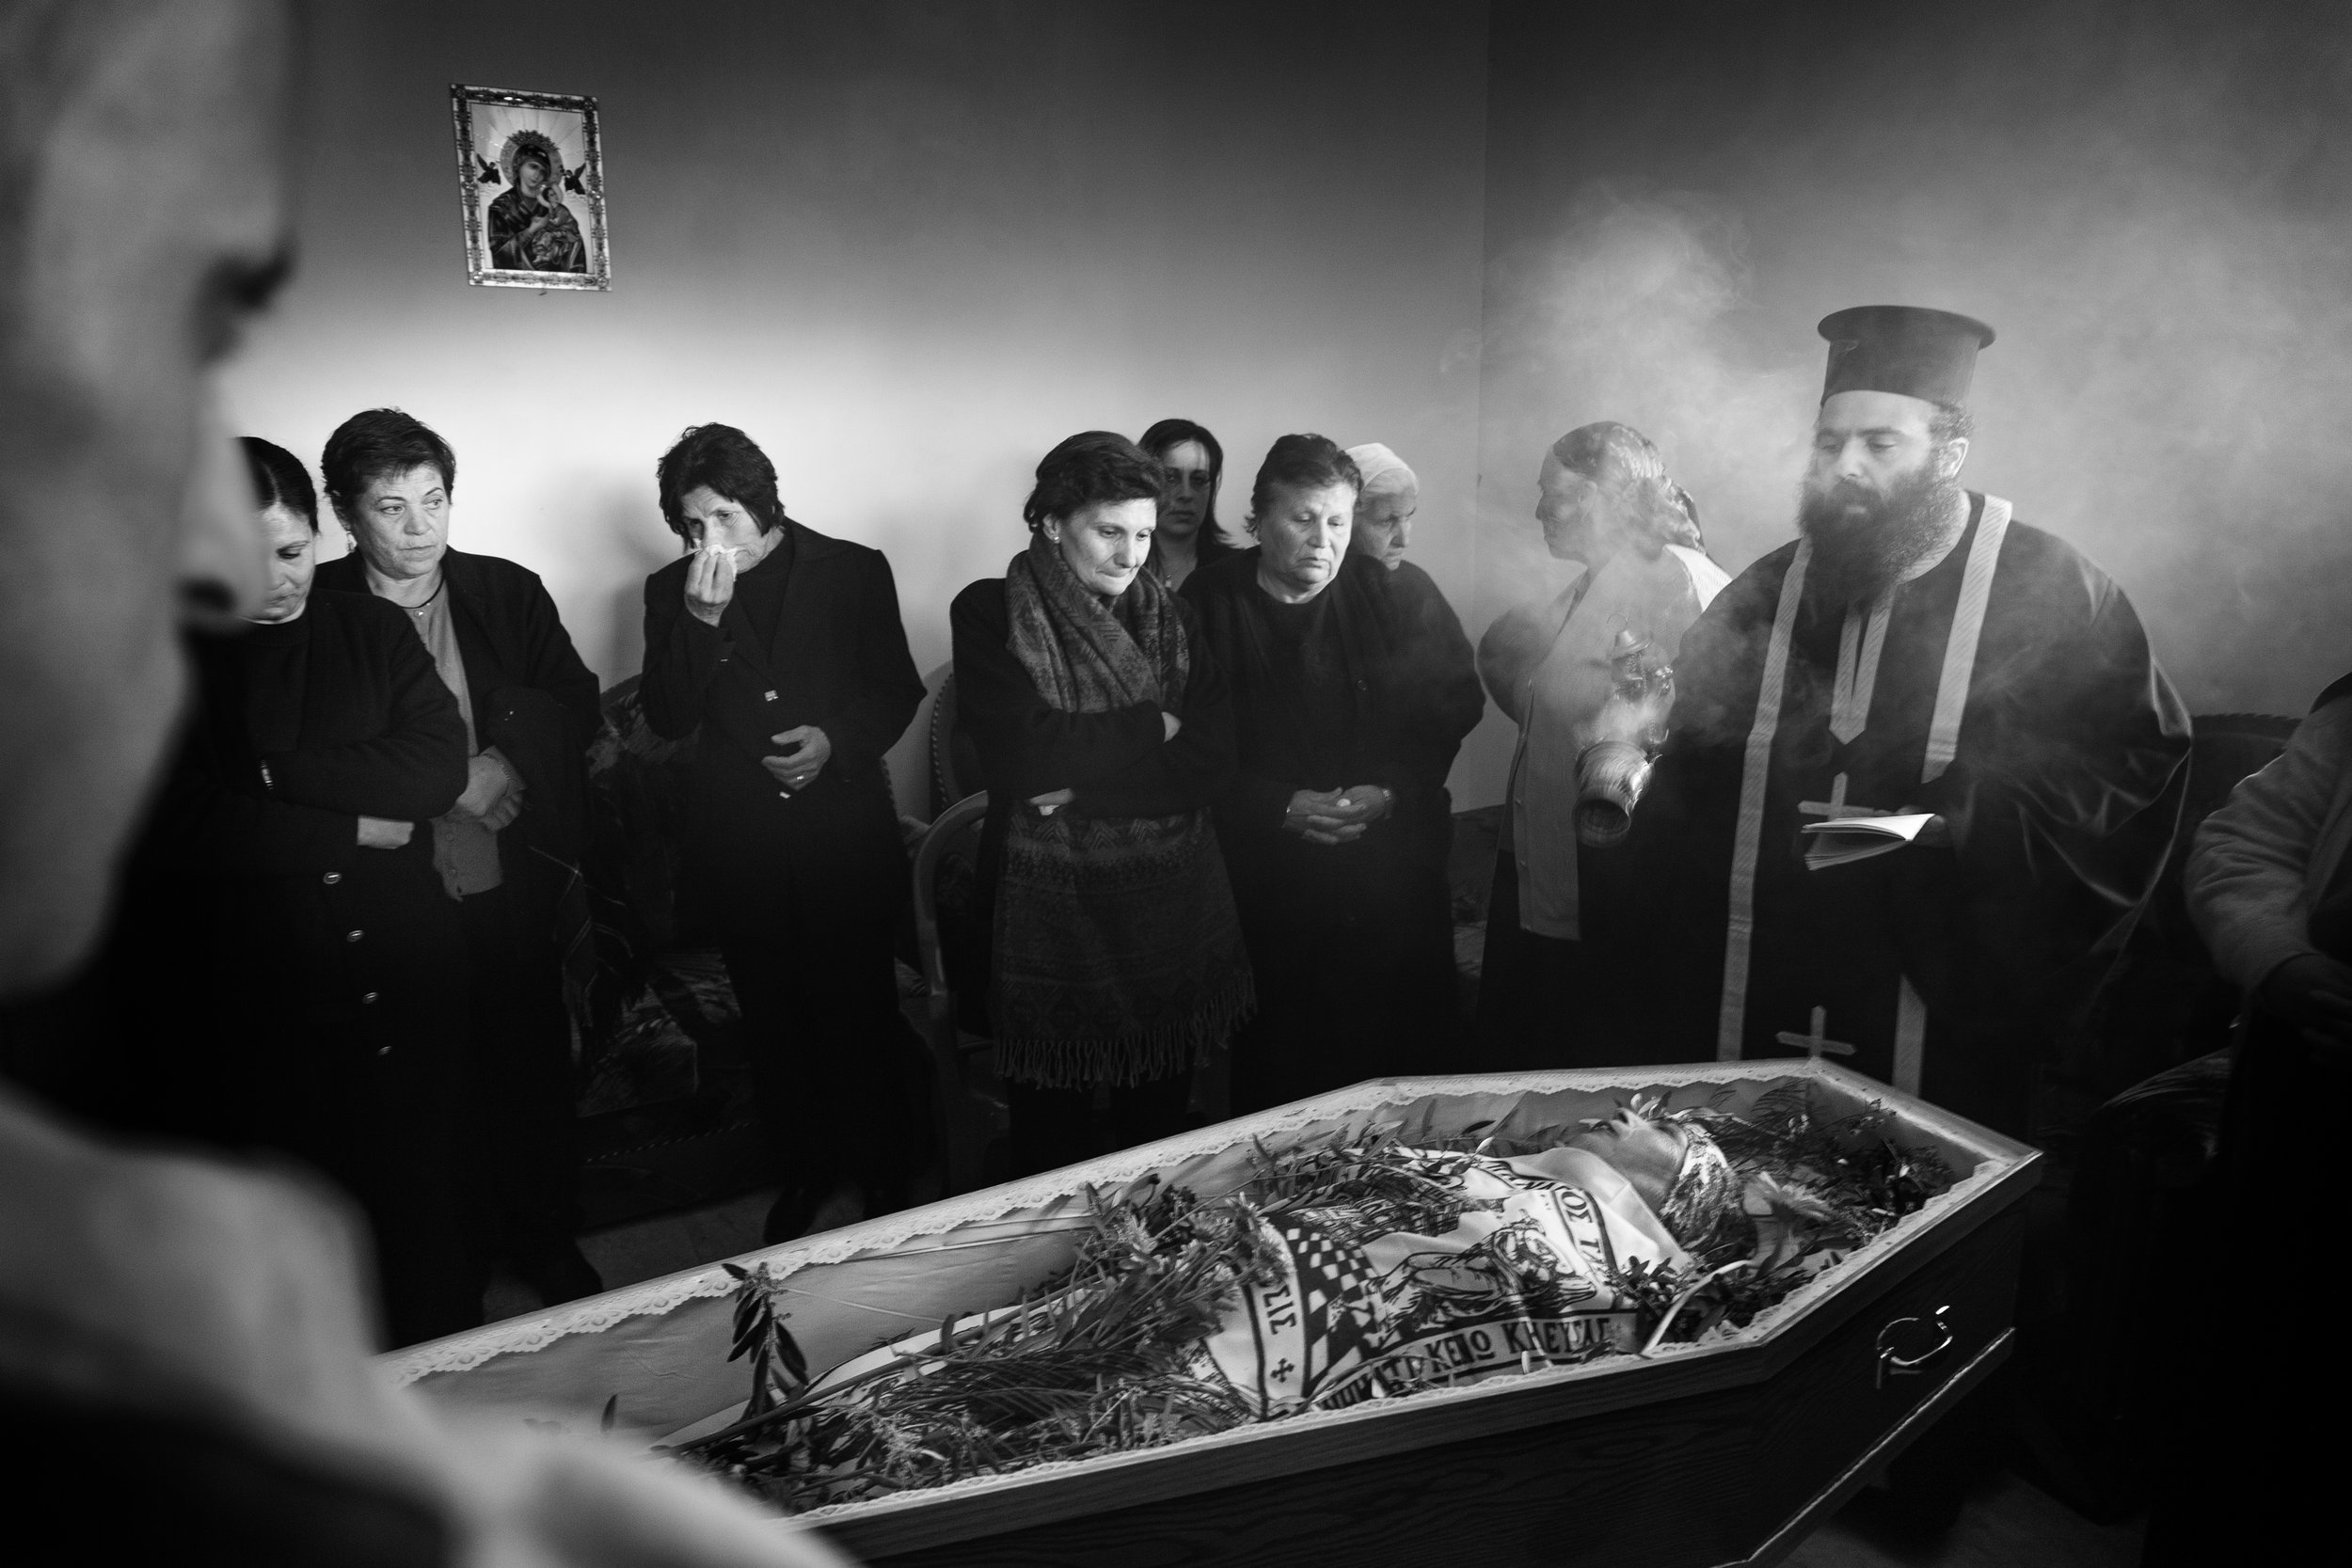  Rituals are performed for Sa'ad Yacoub Issa who was buried in West Bank, Palestine in 2008. With no family left behind to mourn Issa's passing, residents from a small Palestinian village came out to honor her with a traditional Greek Orthodox ceremo